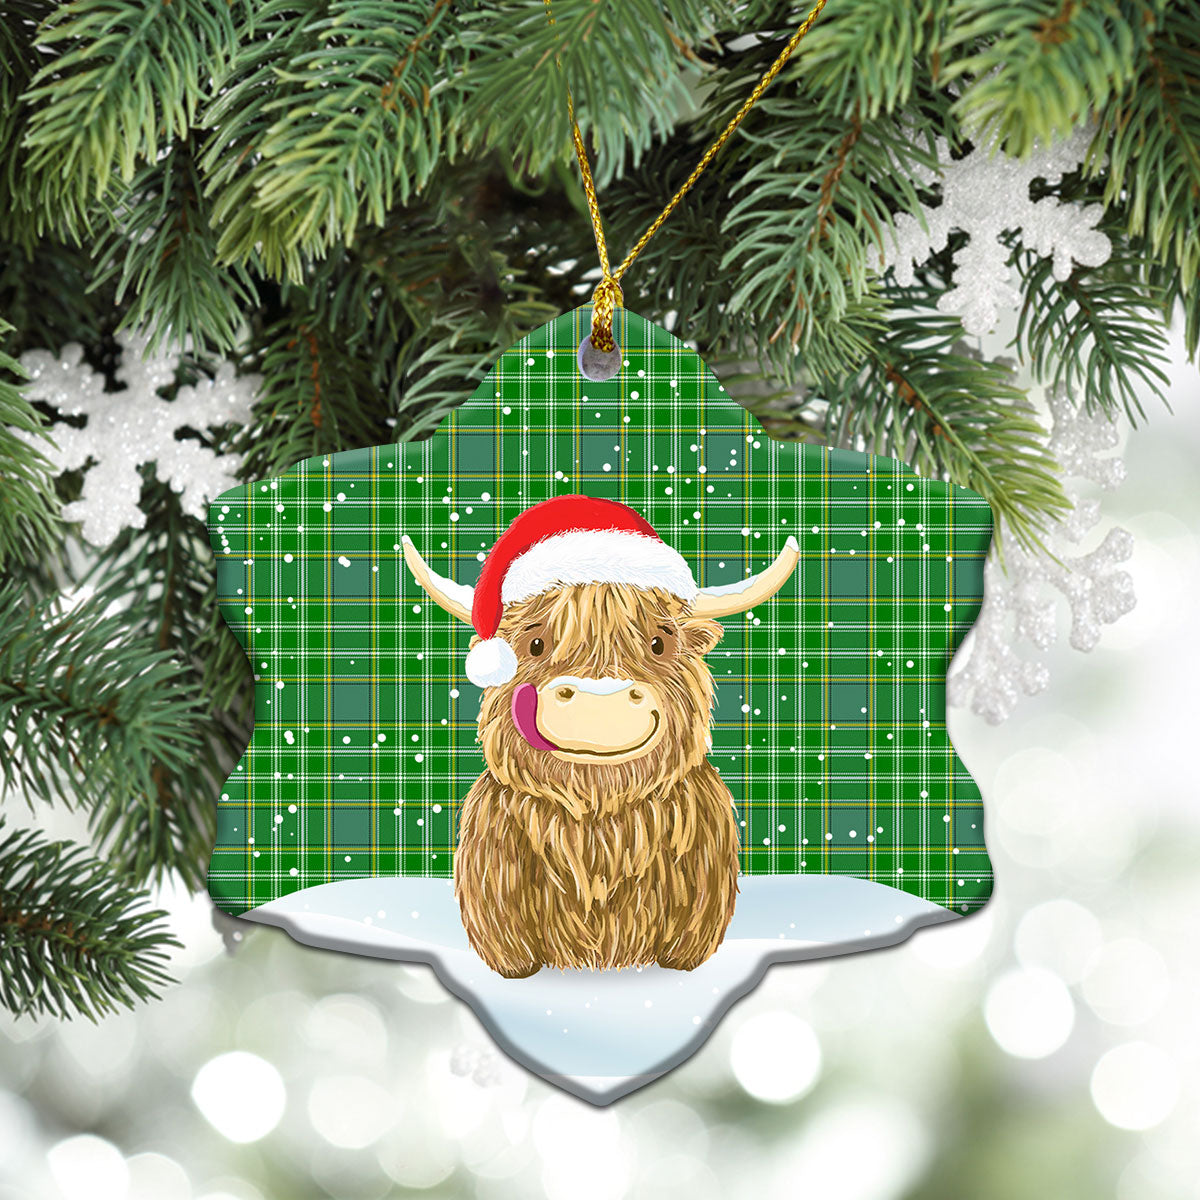 Currie or Curry Tartan Christmas Ceramic Ornament - Highland Cows Style